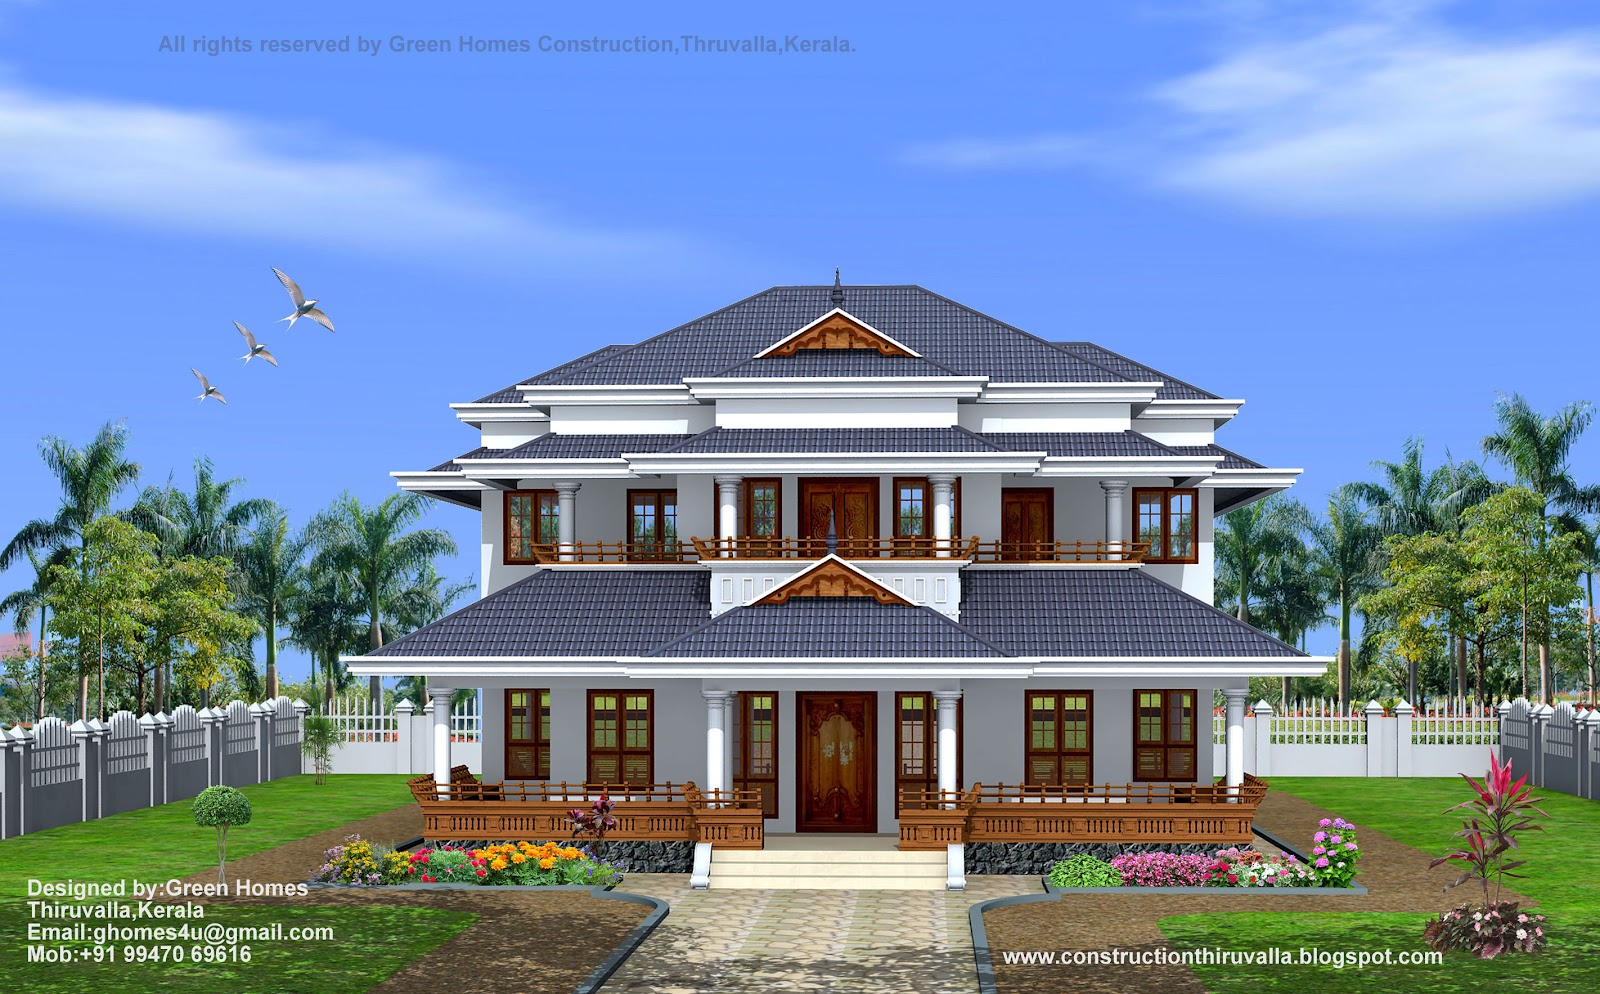 ... feet traditional style home designed by green homes thiruvalla kerala